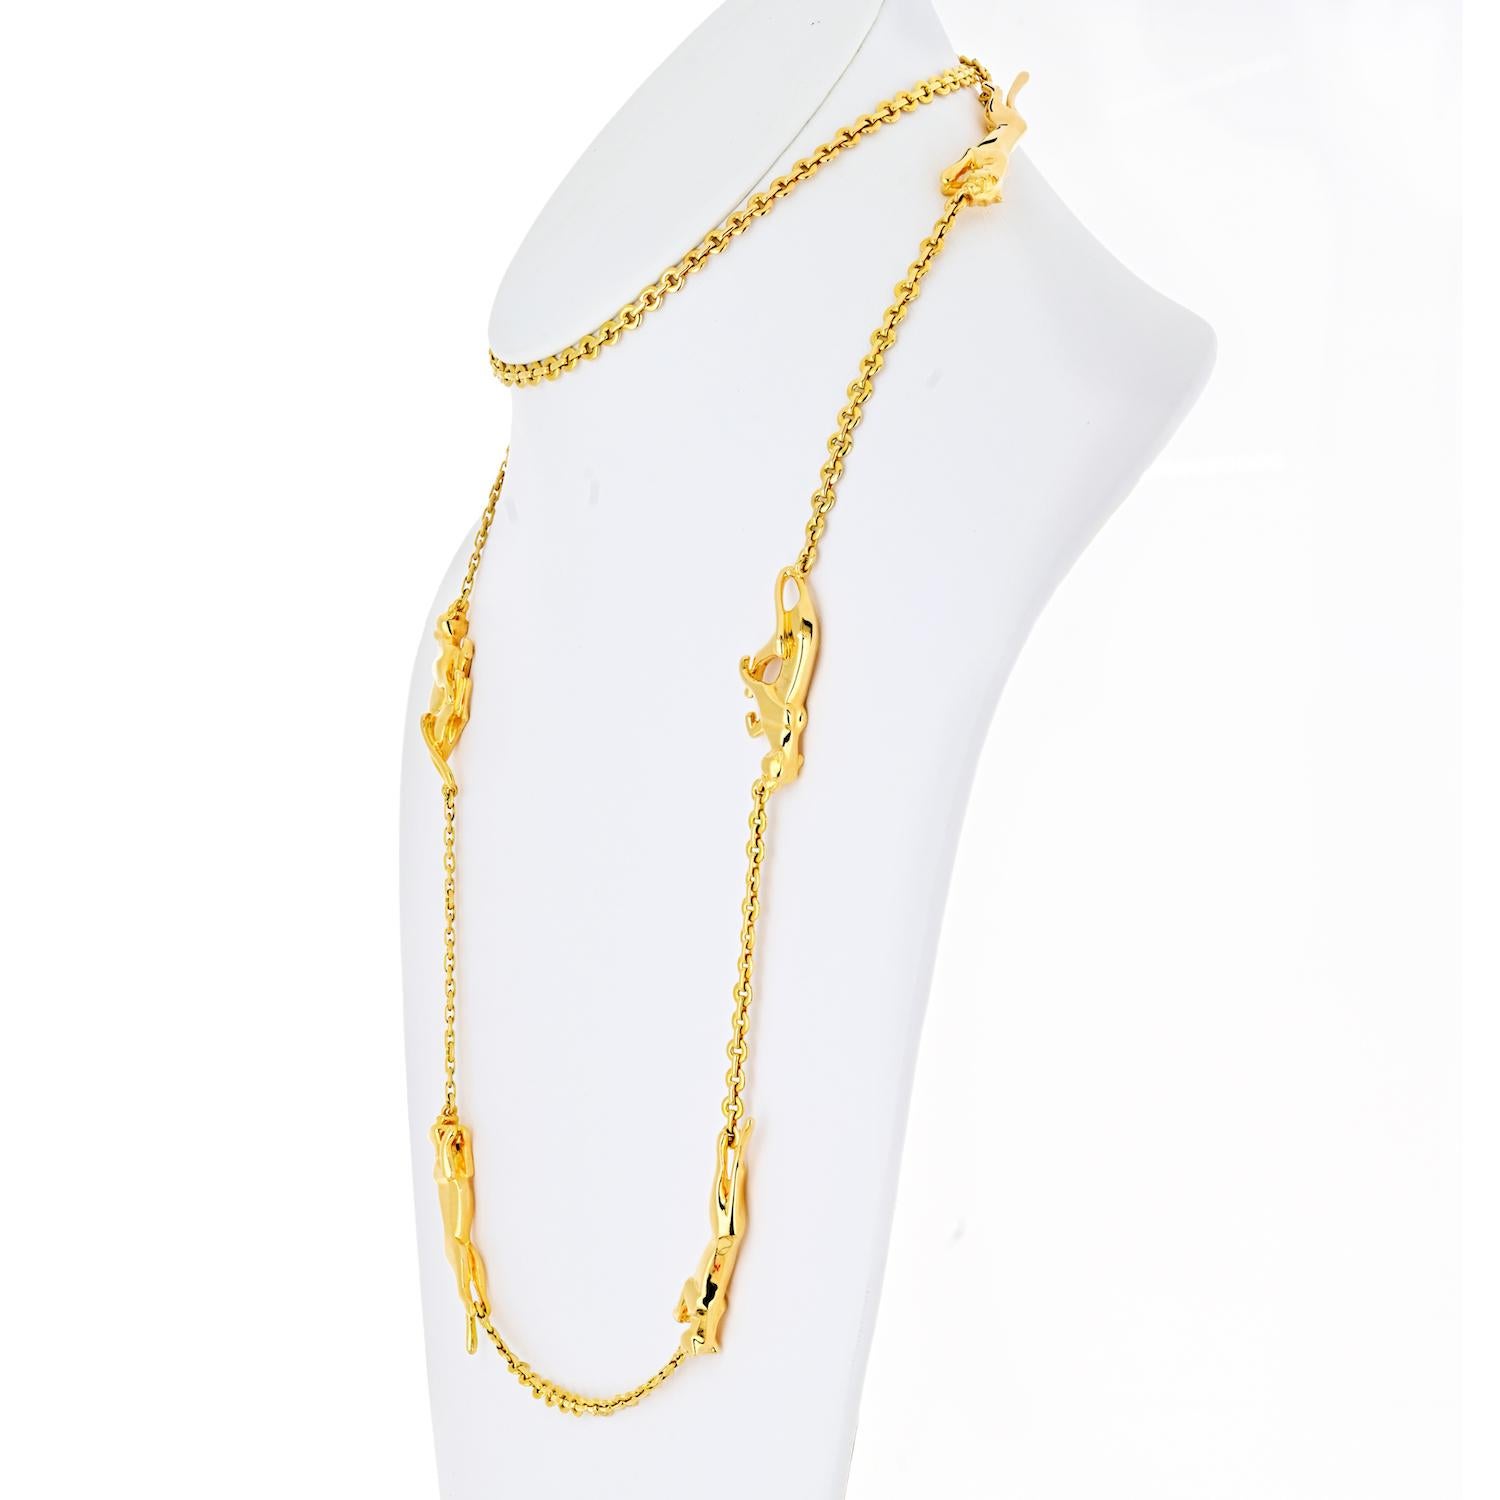 Cartier vintage chain necklace with 6 motif pantheres. 
Presented here is a rare find: long strand 6 motif Running Panthere chain necklace. Excellent condition, timeless design with vintage, more masculine looking panthere charms.
The necklace